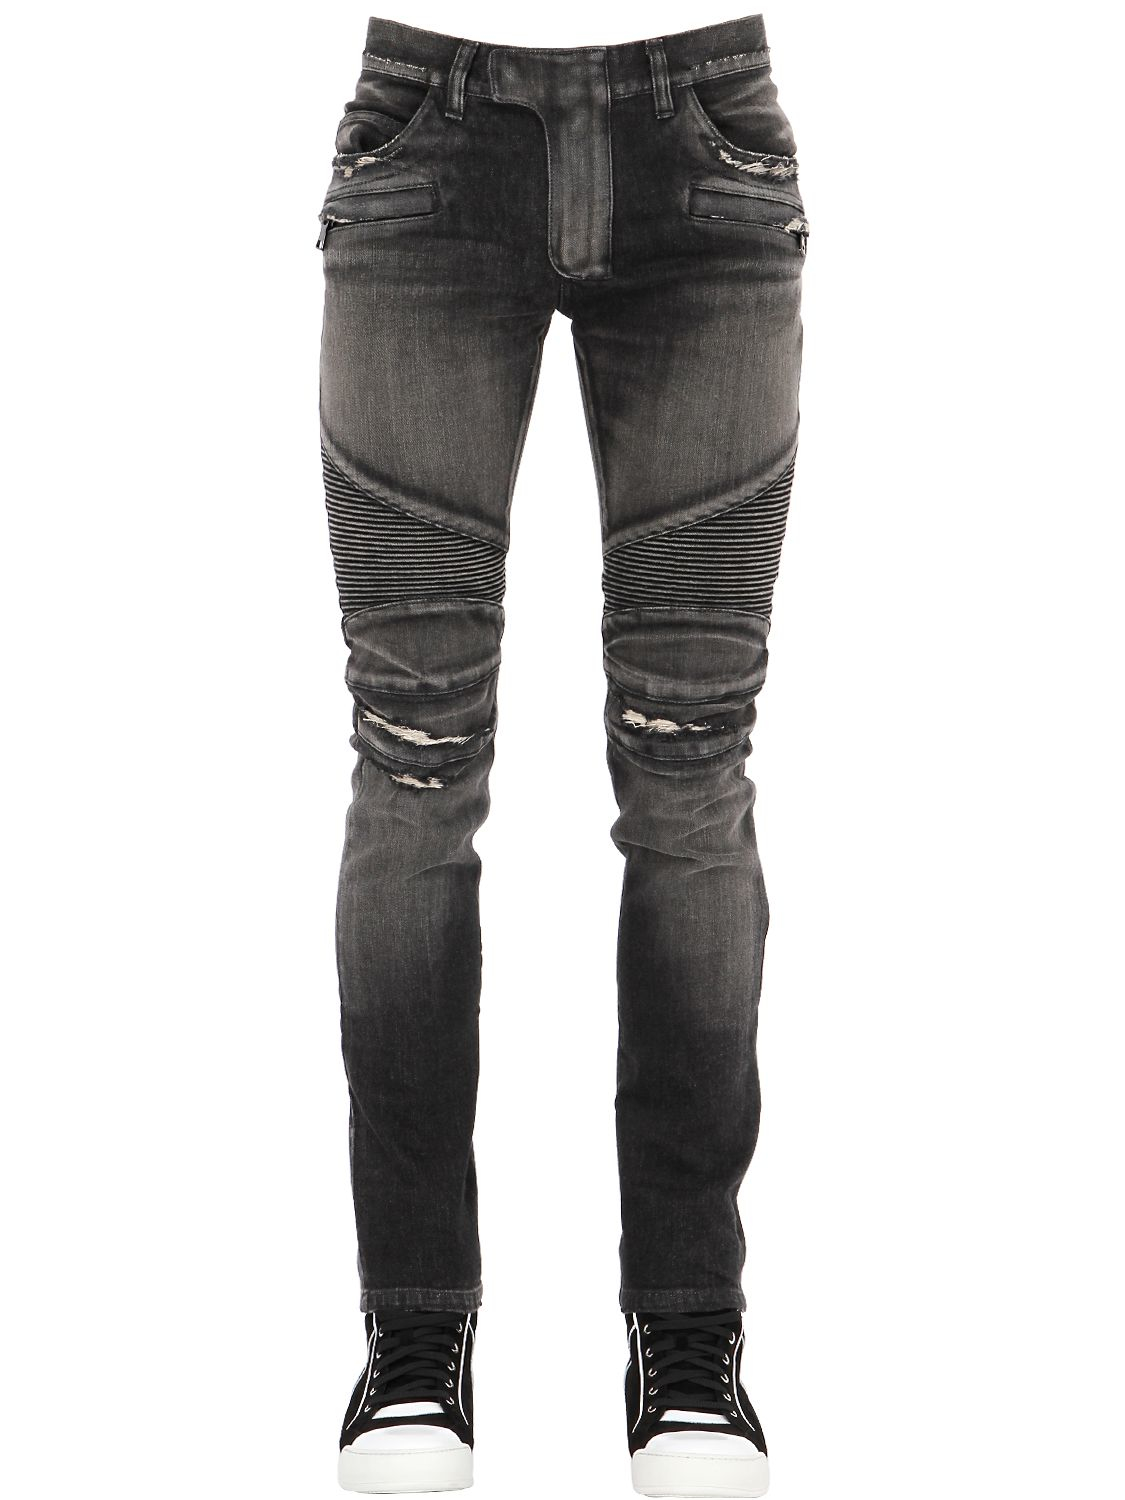 Balmain Jeans Biker - These are truly classic and hard to find with the ...